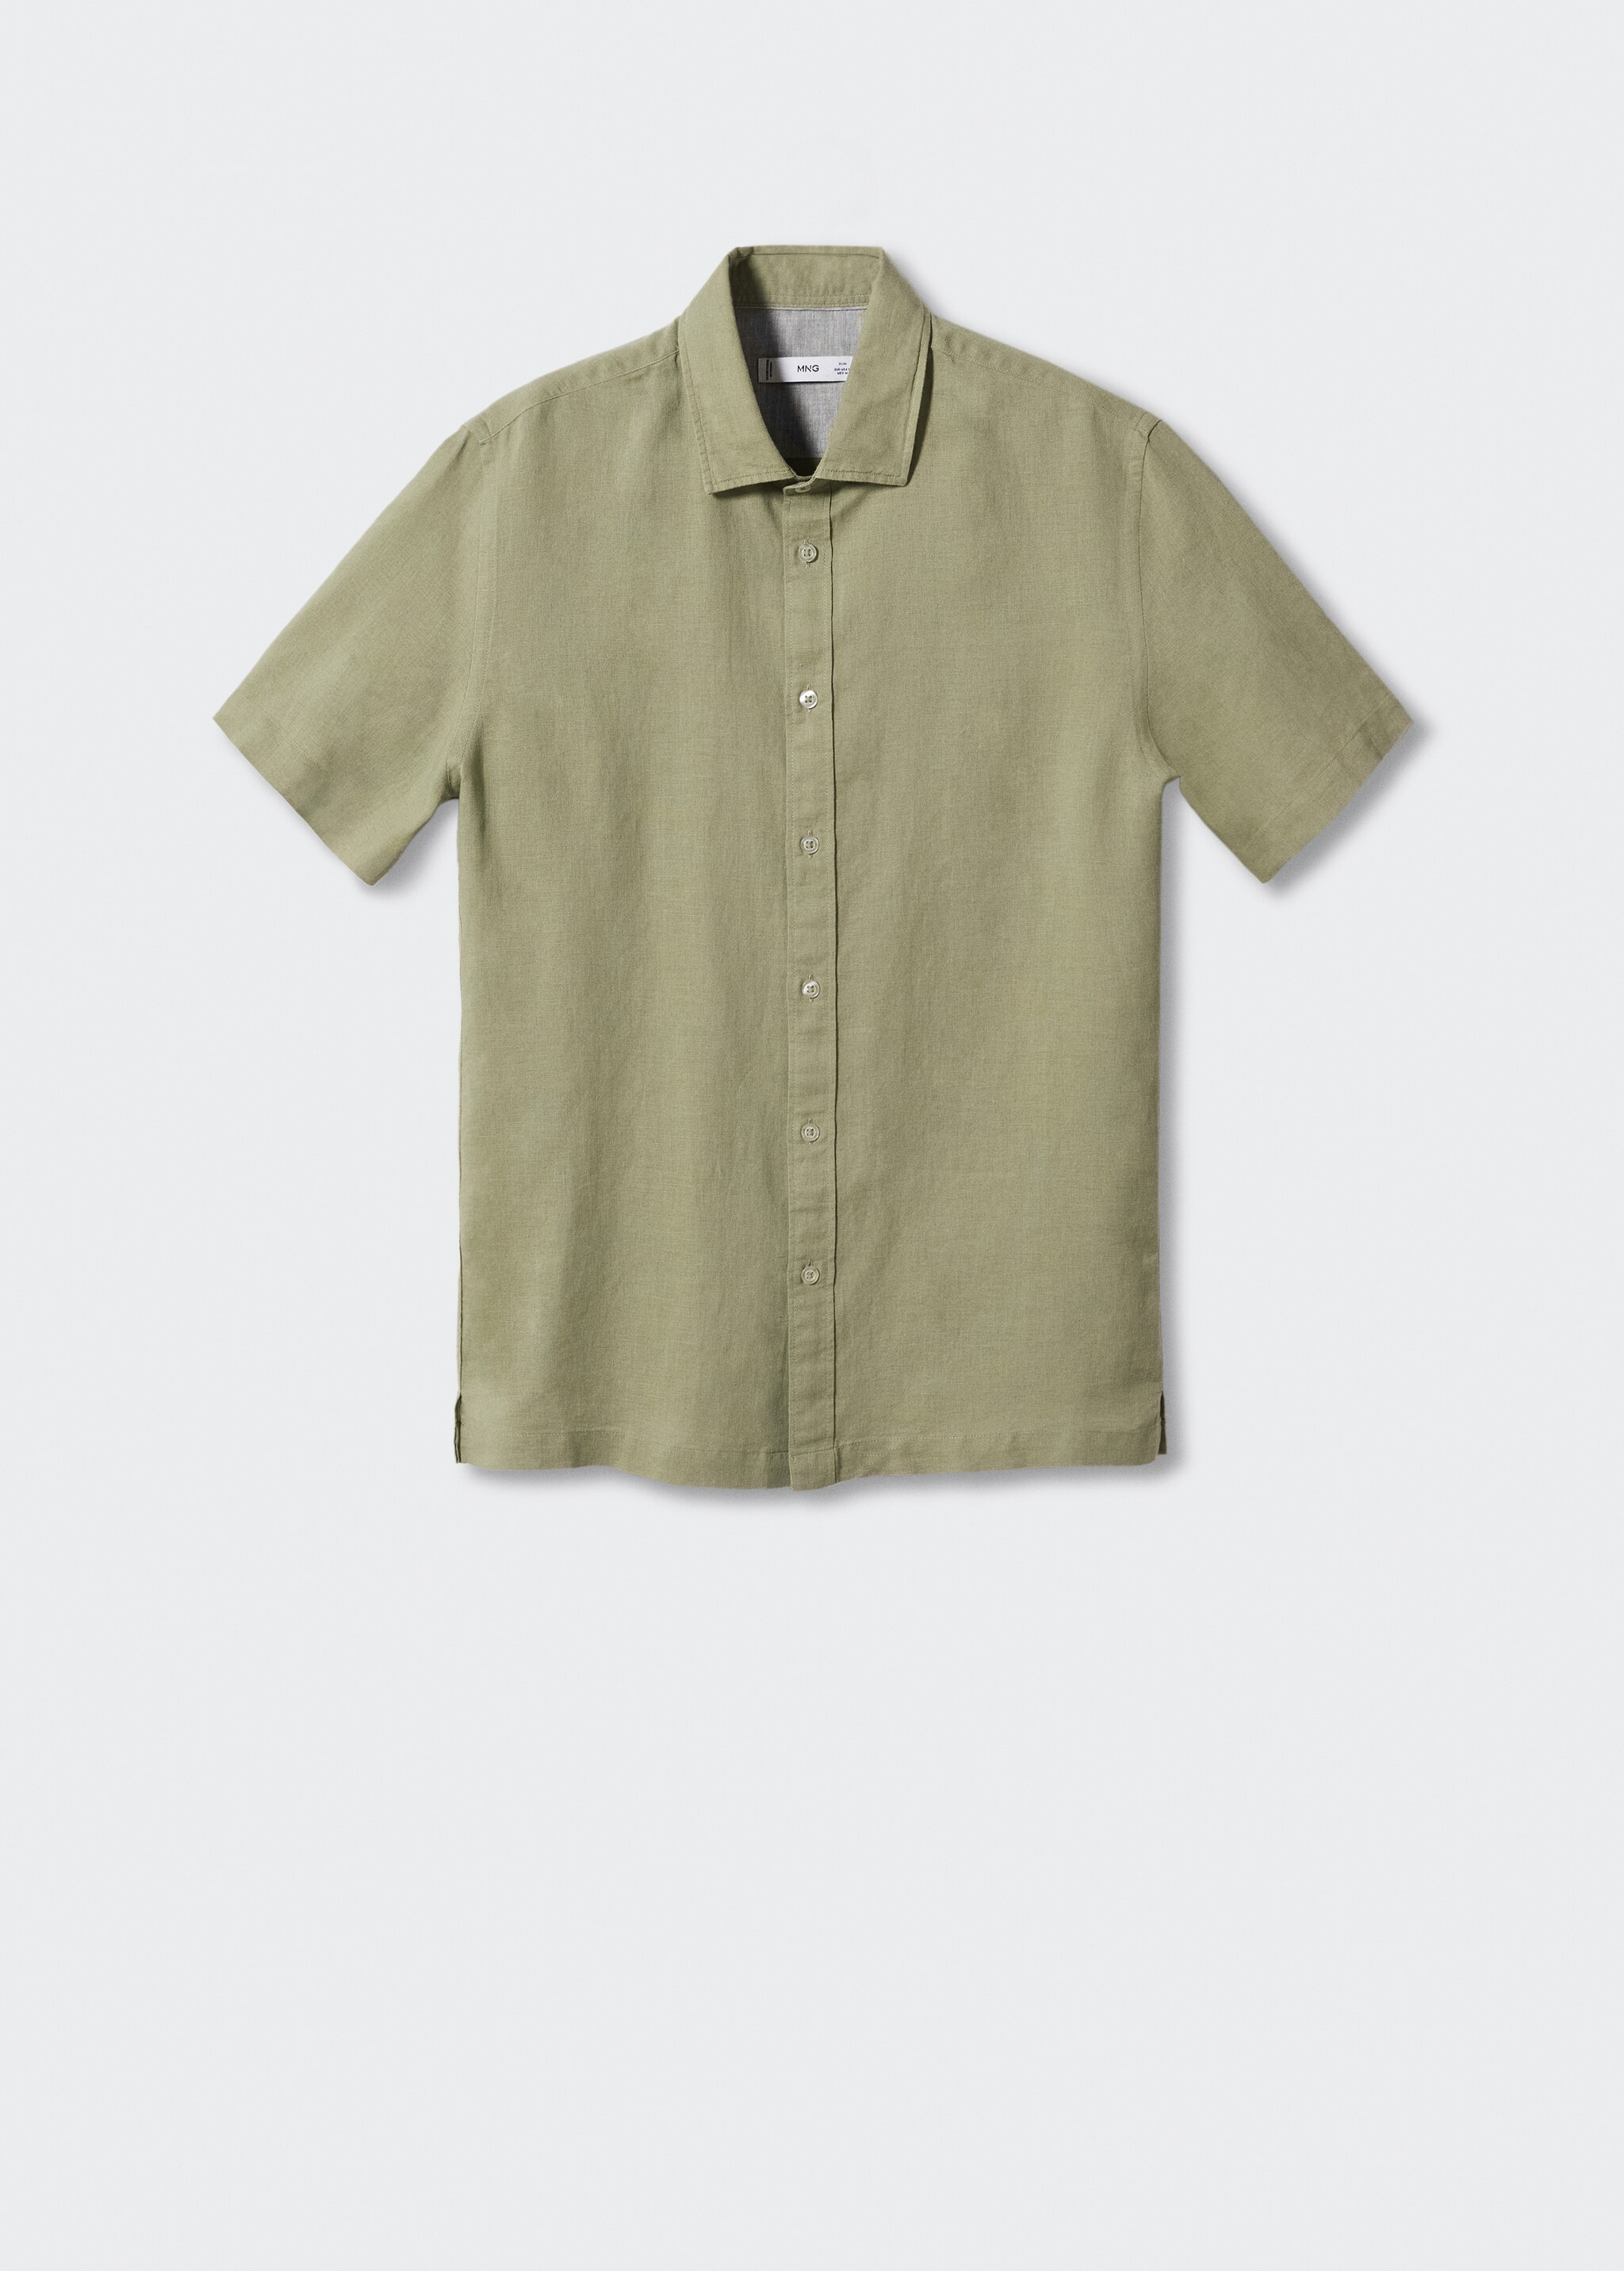 100% linen short sleeve shirt - Article without model